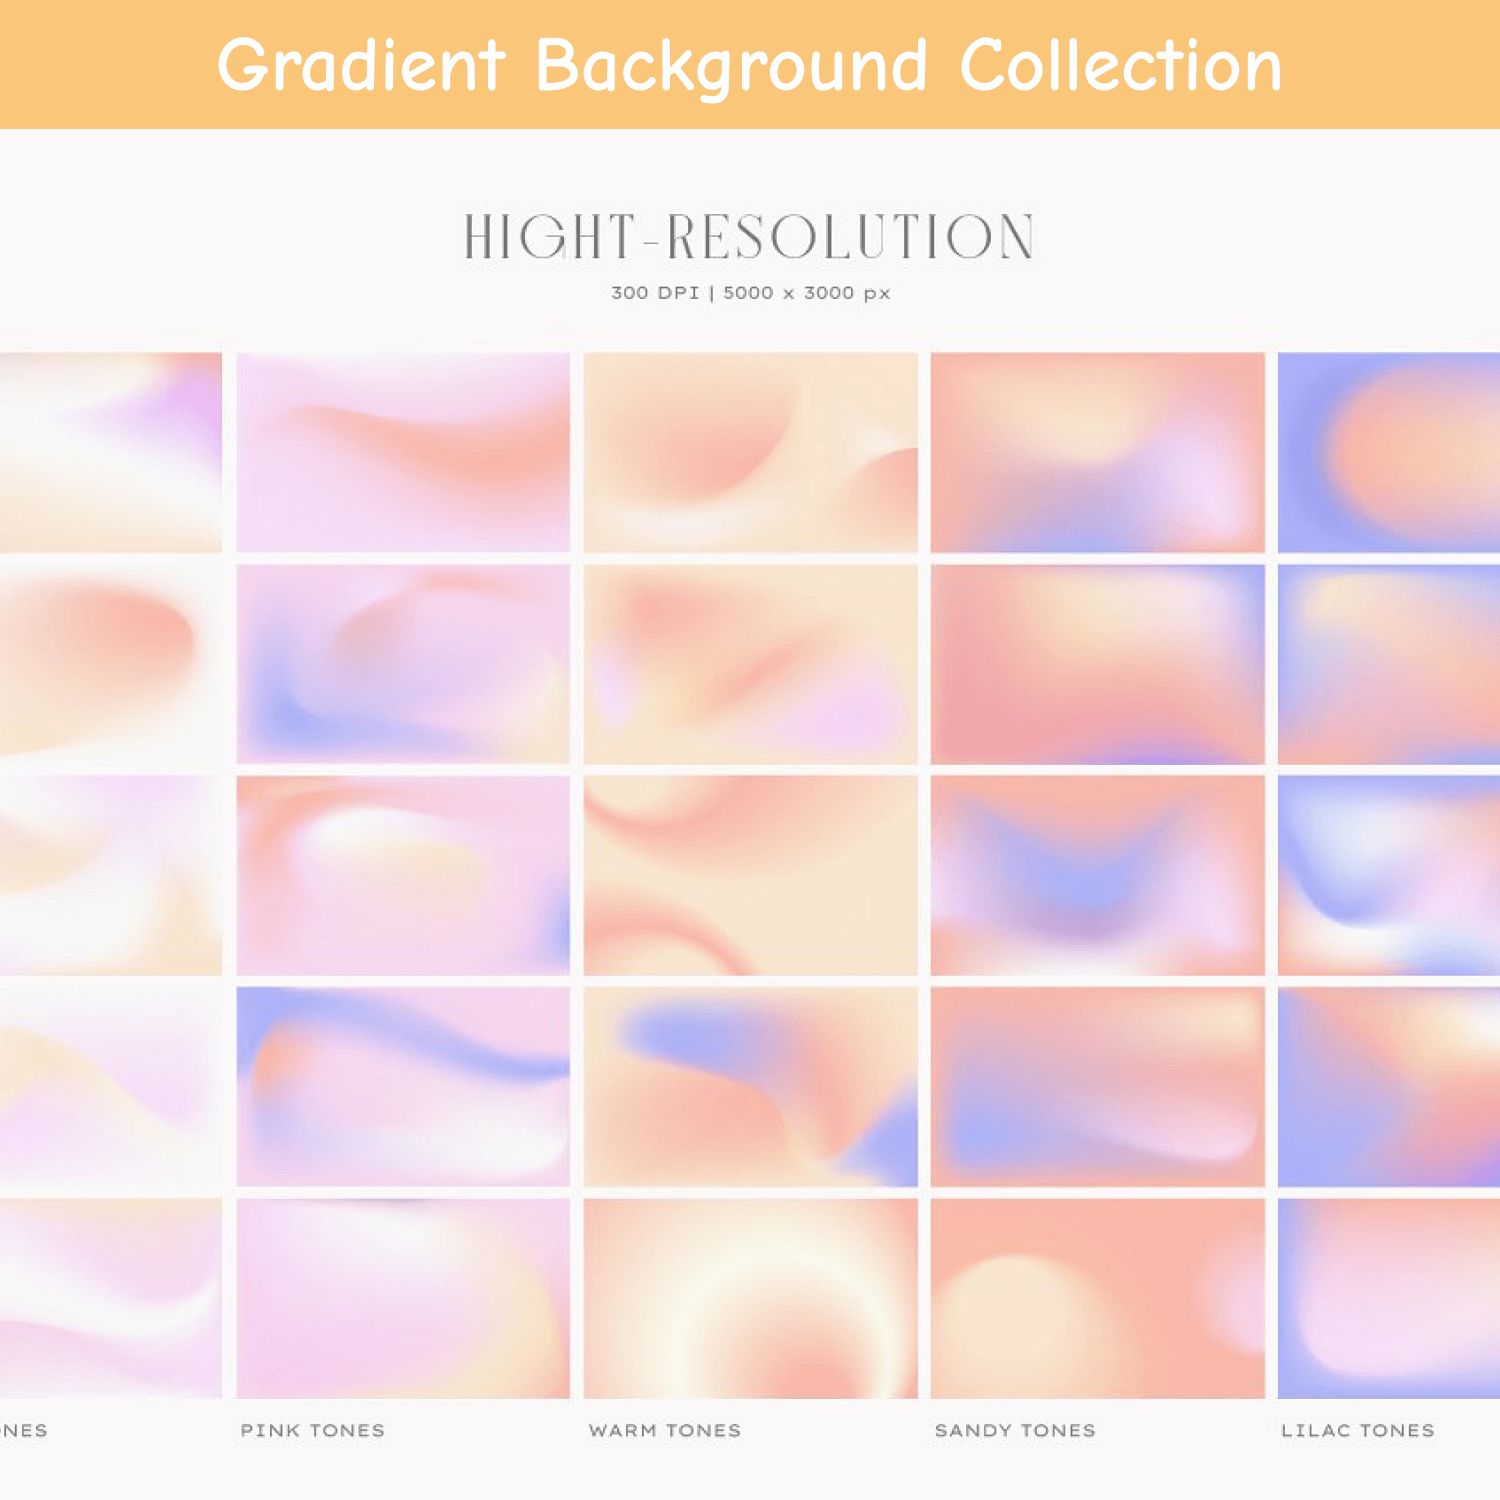 Hight-resolution of Gradient Background Collection.